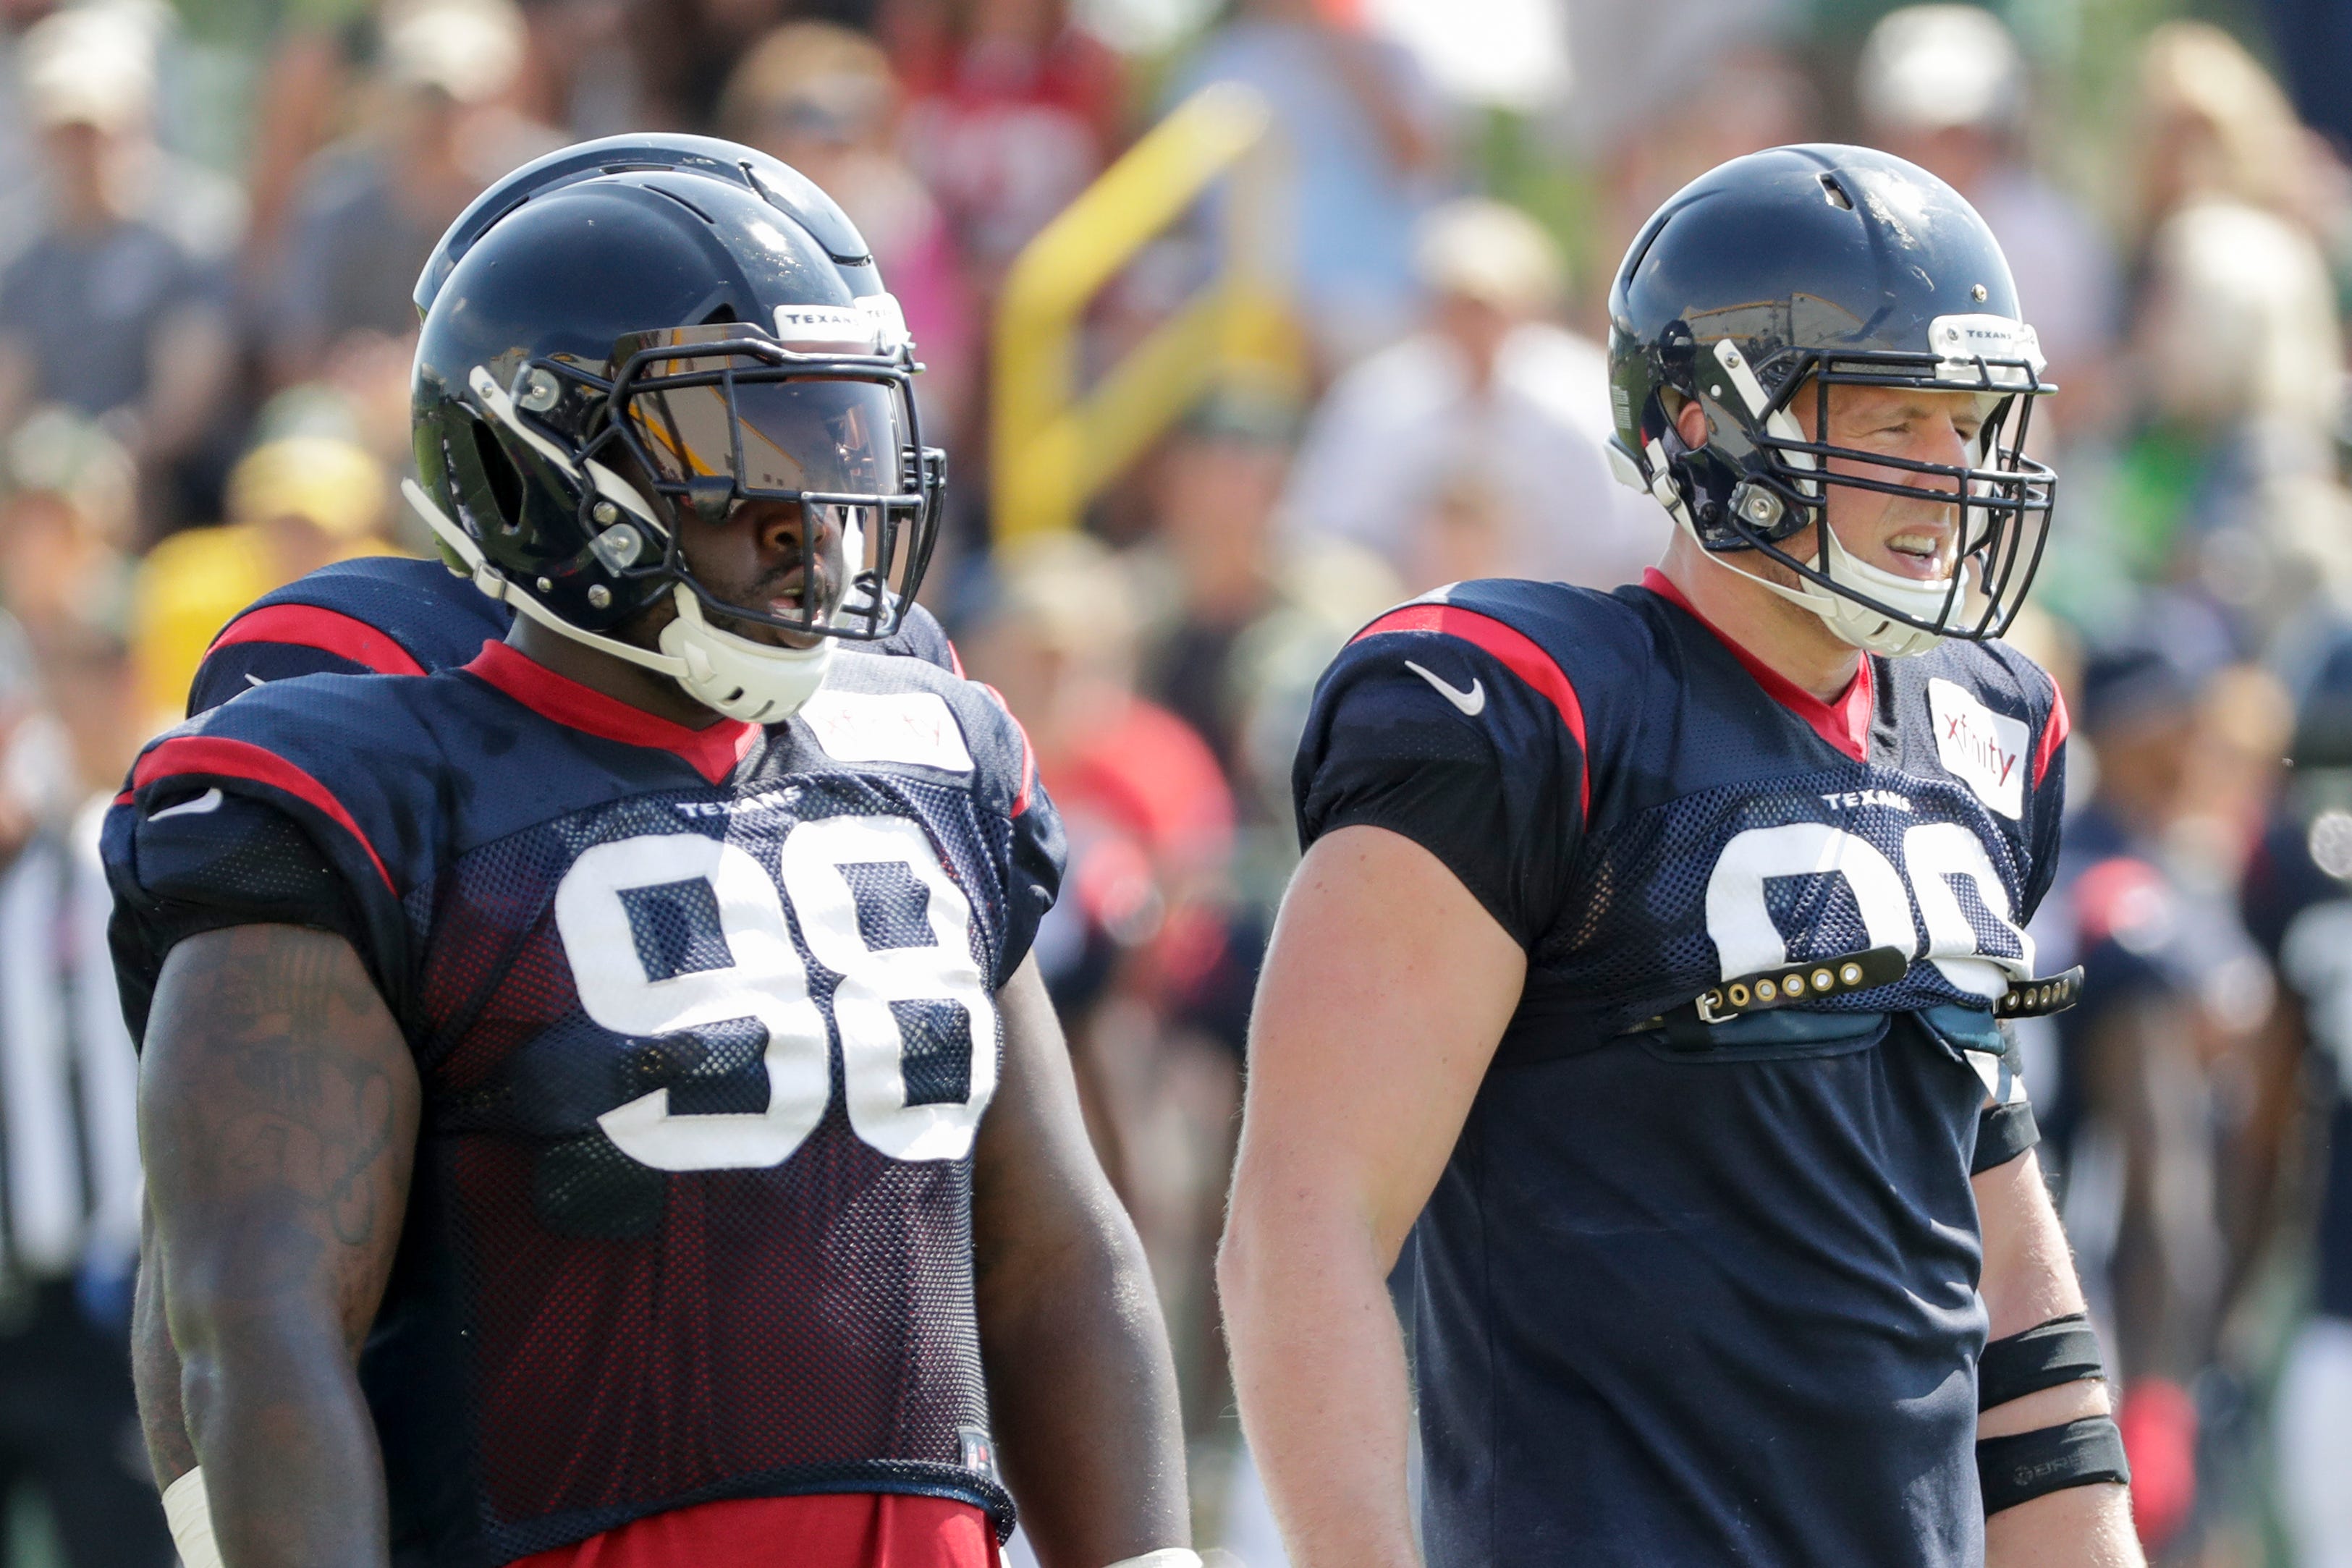 Texans defensive ends D. J. Reader (98) and J. J. Watt (99) line up for a scrimmage during a joint training camp practice with the Green Bay Packers at Ray Nitchske Field Monday, August 5, 2019, in Ashwaubenon, Wis.